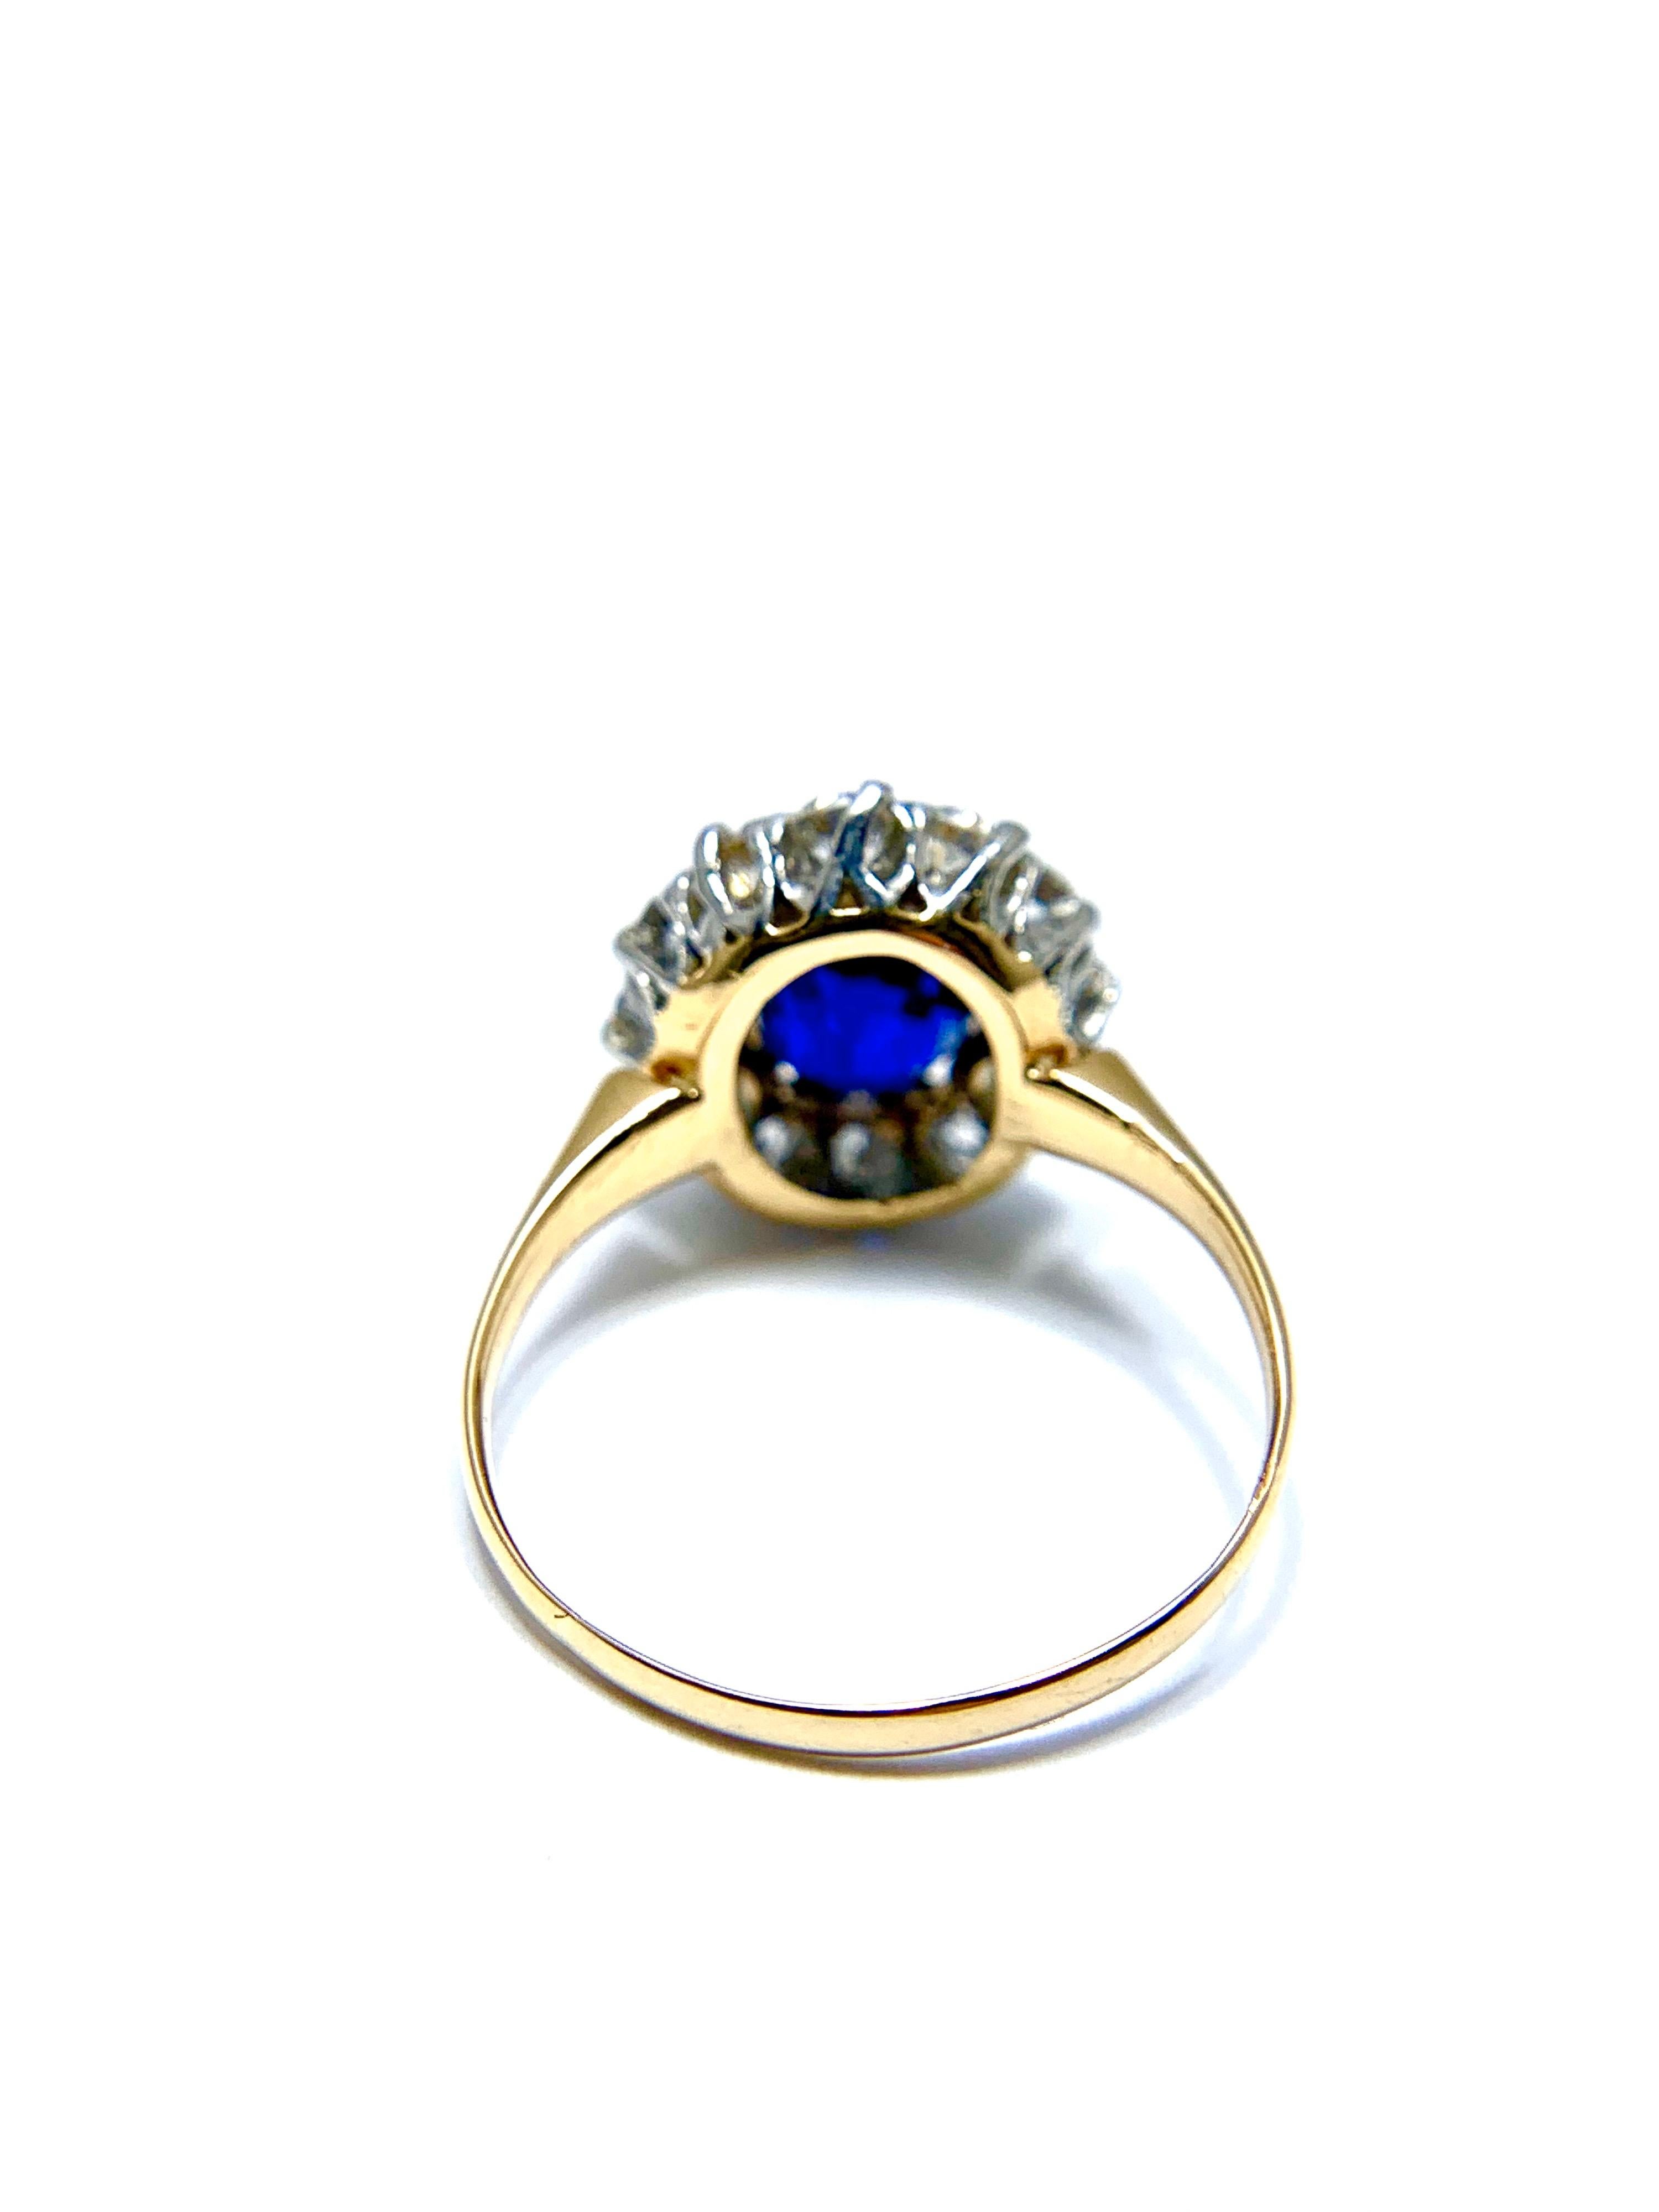 Women's or Men's 2.63 Carat Oval No Heat Natural Sapphire and Diamond Platinum and Yellow Gold